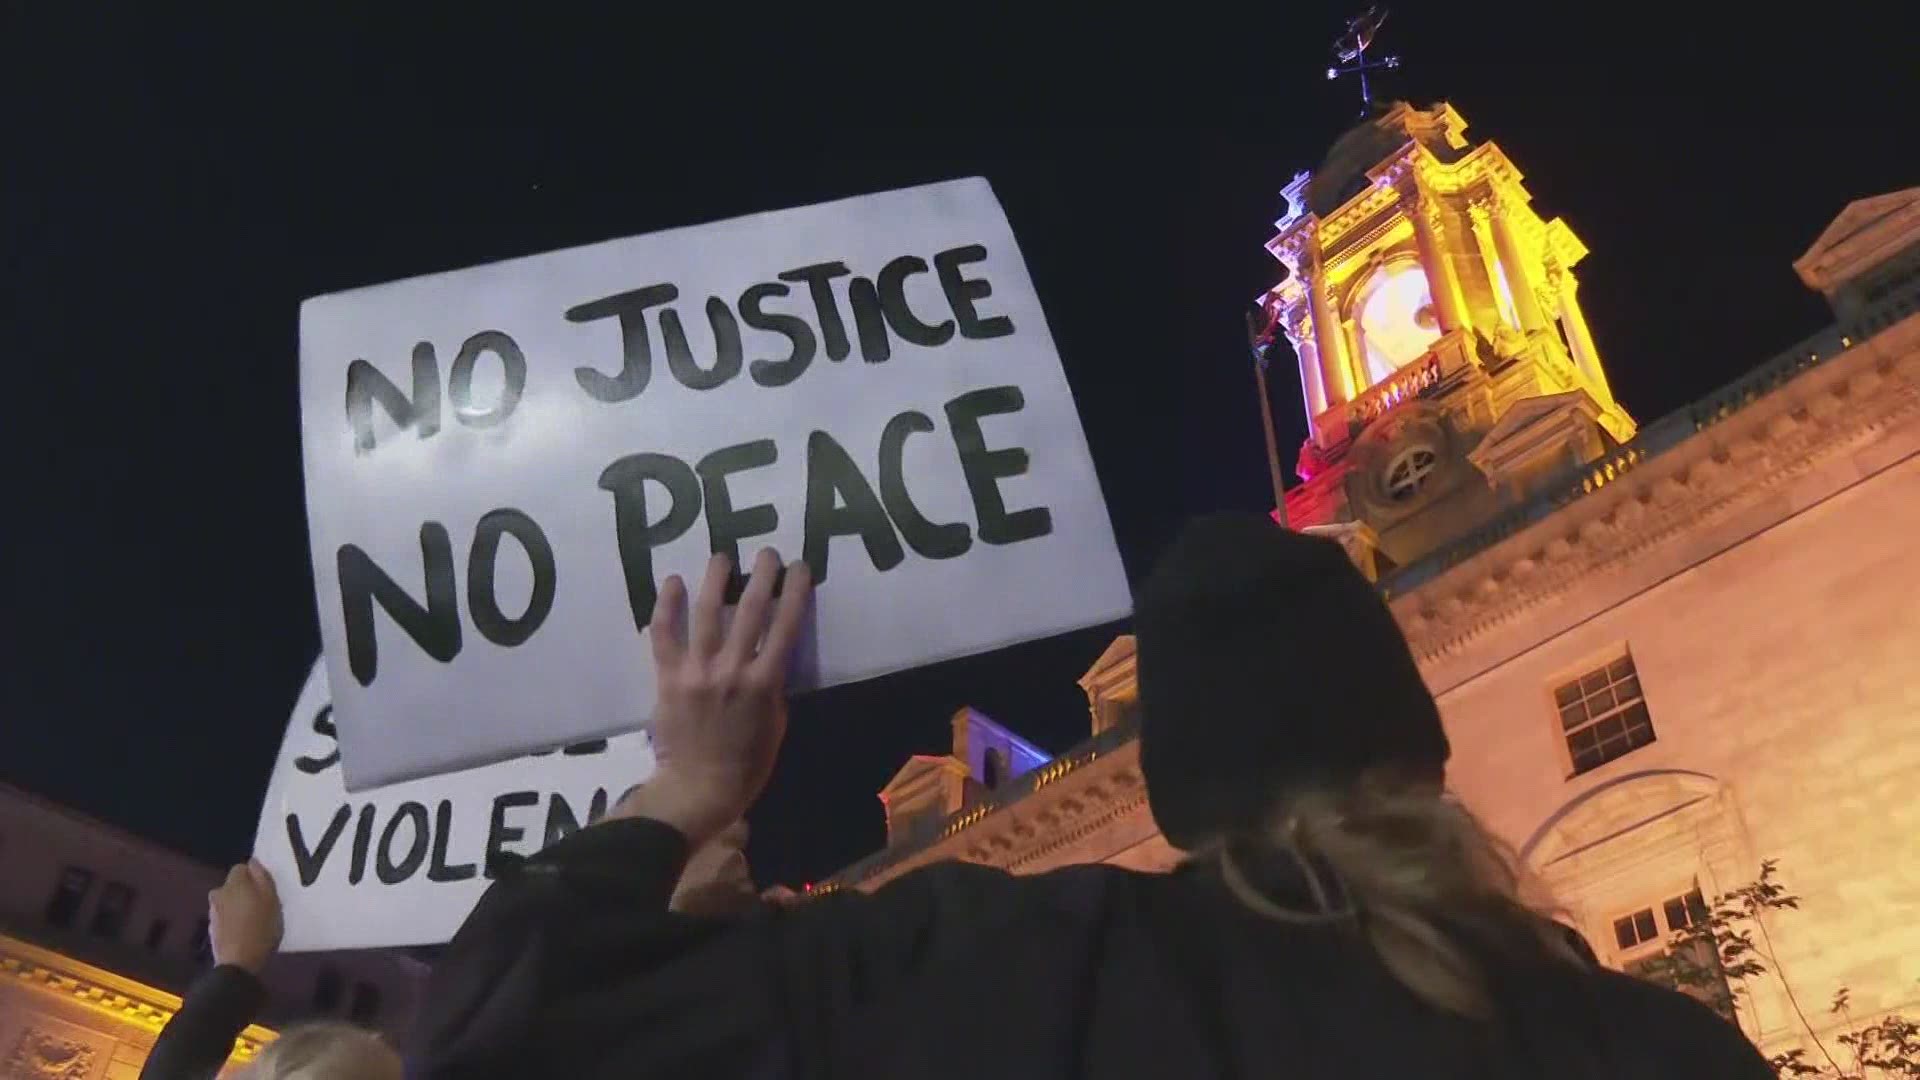 More than 6 months after Black Lives Matter protests rocked the country, the Maine Legislature is being asked to take a step to help reduce racial inequality.